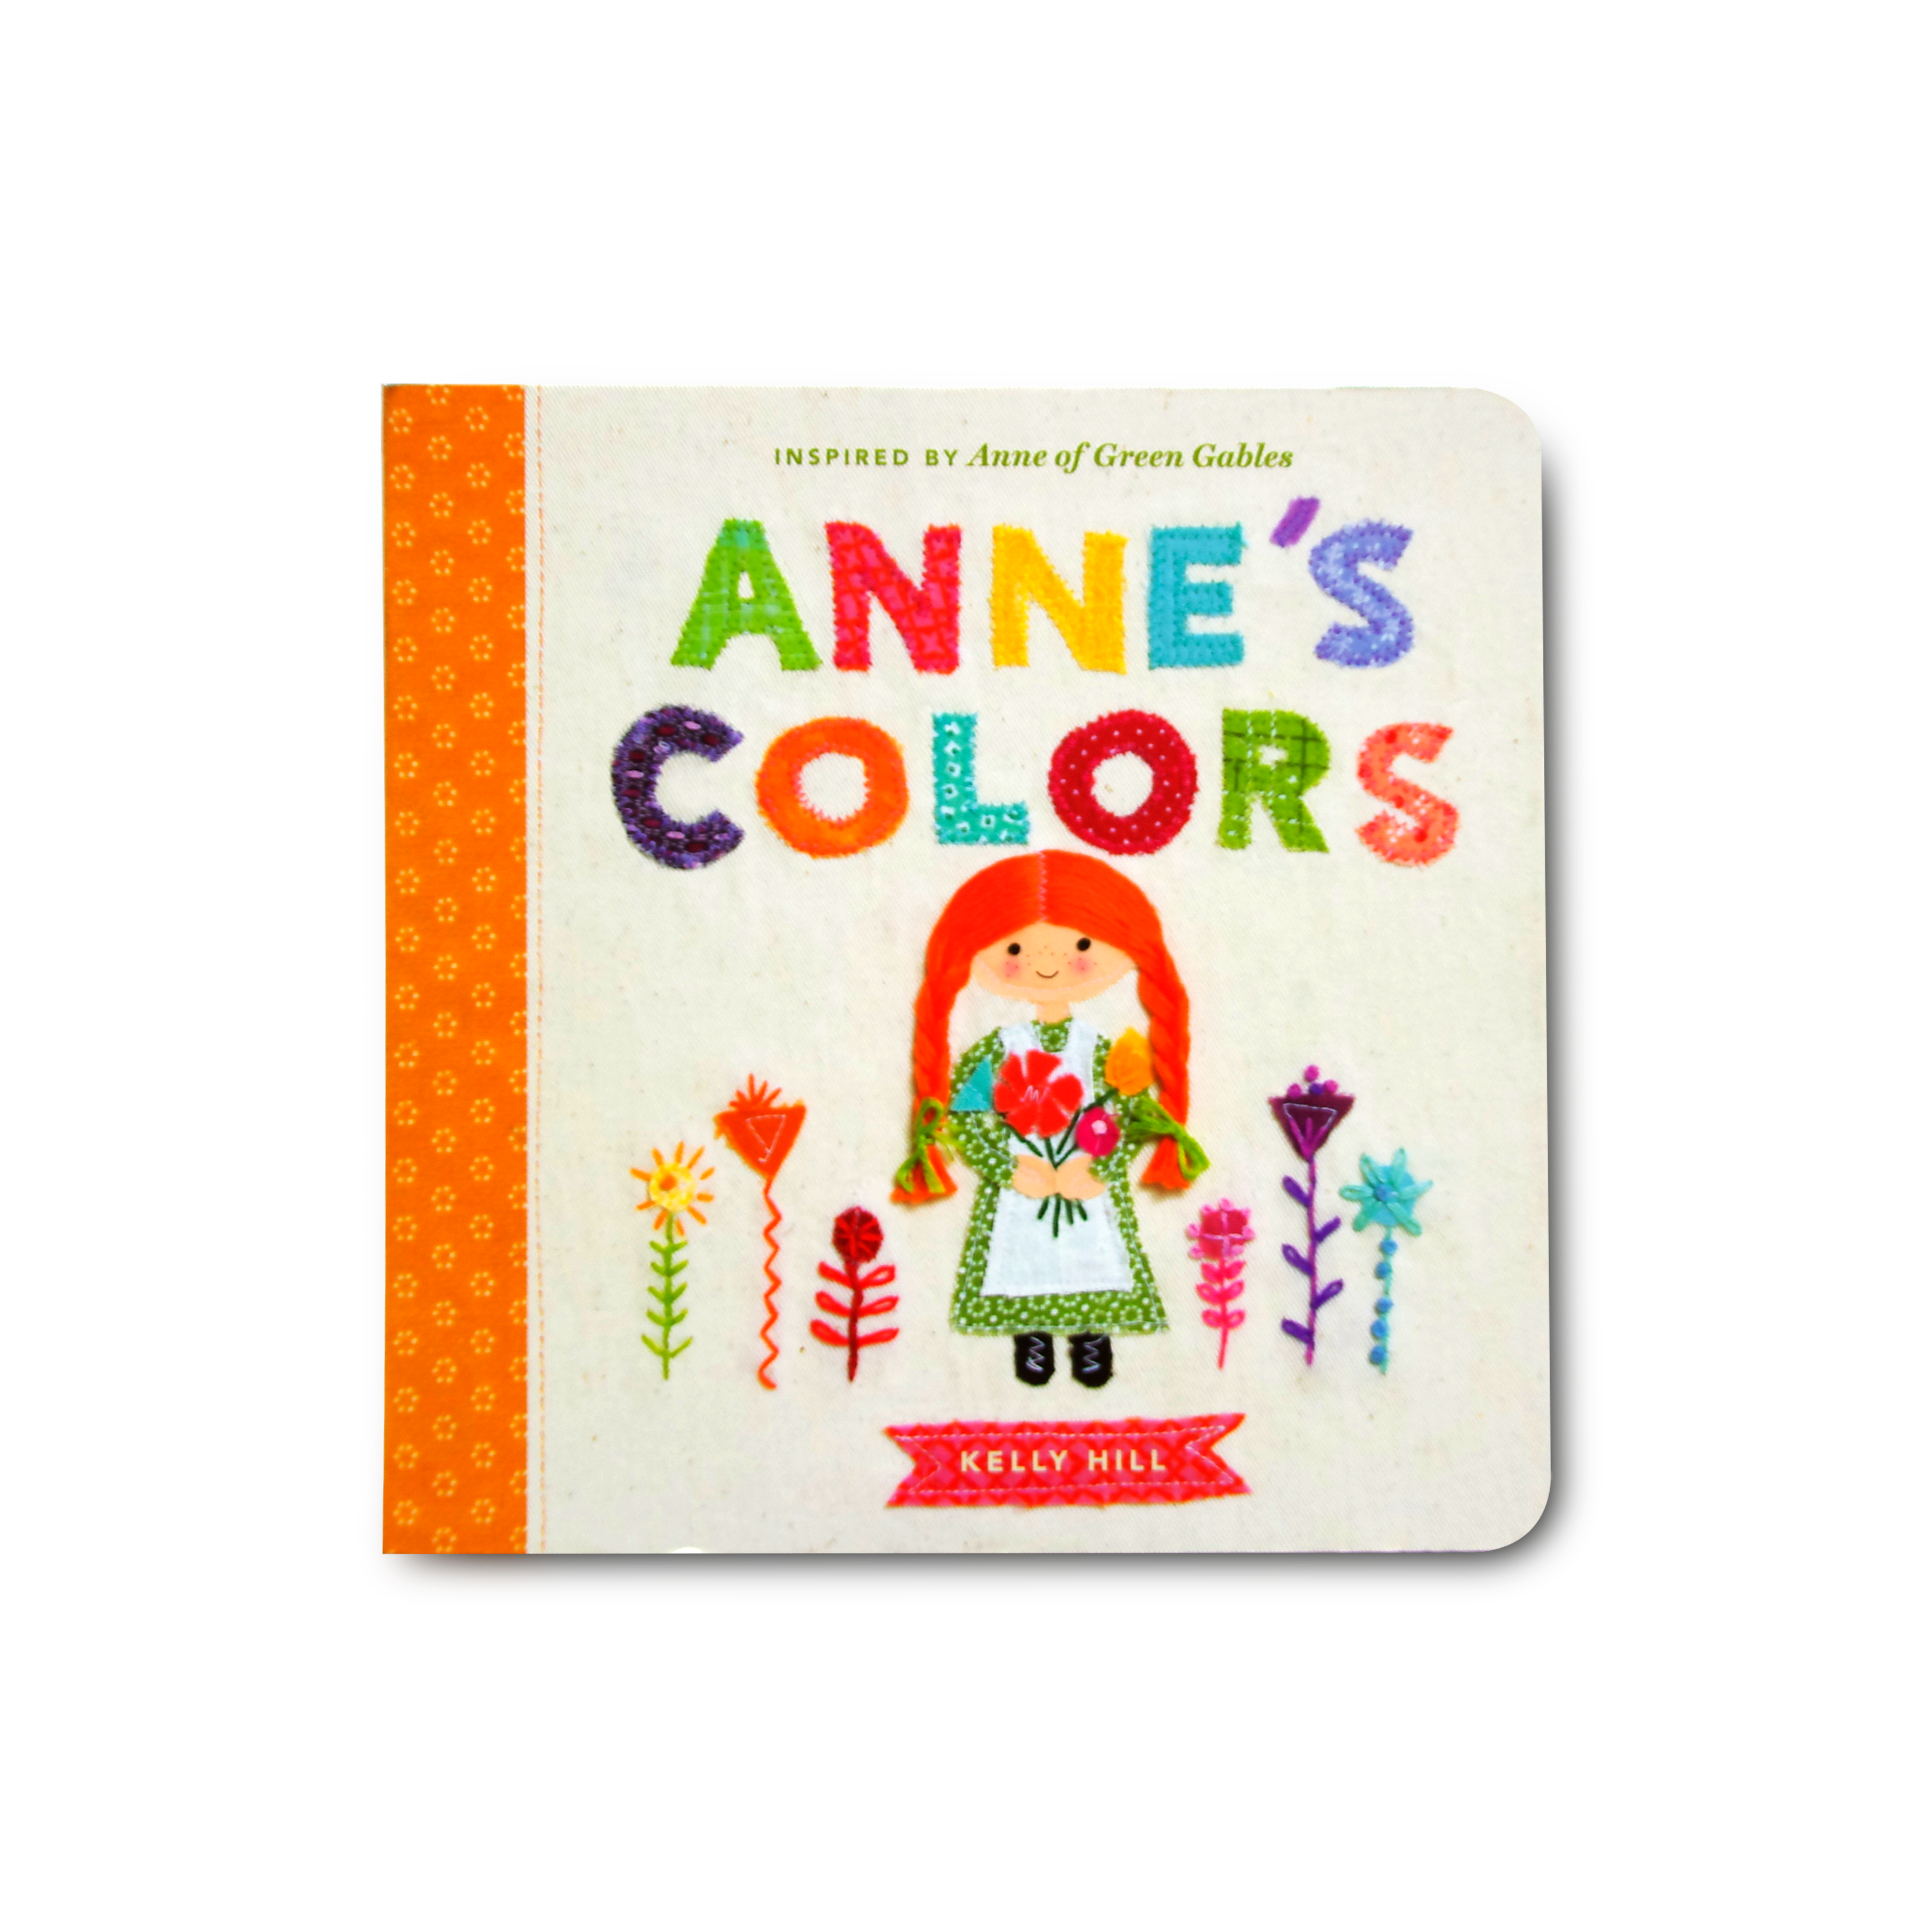 Anne's Colors: Inspired by Anne of Green Gables (Anne Concept Books) - Me Books Asia Store